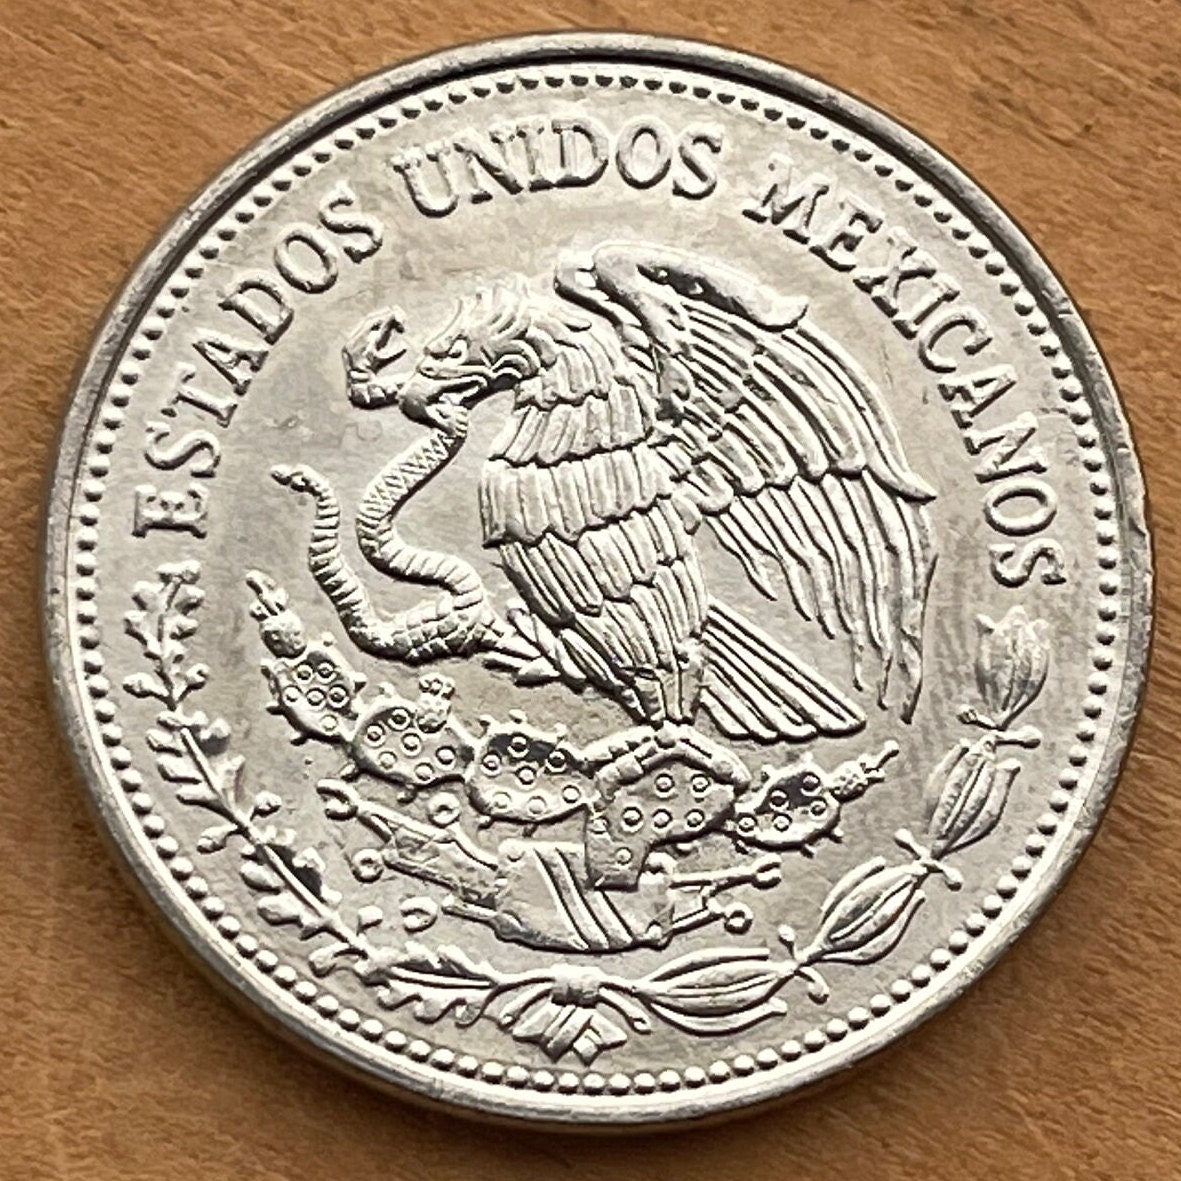 Francisco Madero (LARGE) & Eagle with Snake 500 Pesos Mexico Authentic Coin Money for Jewelry and Craft Making (President of Mexico)